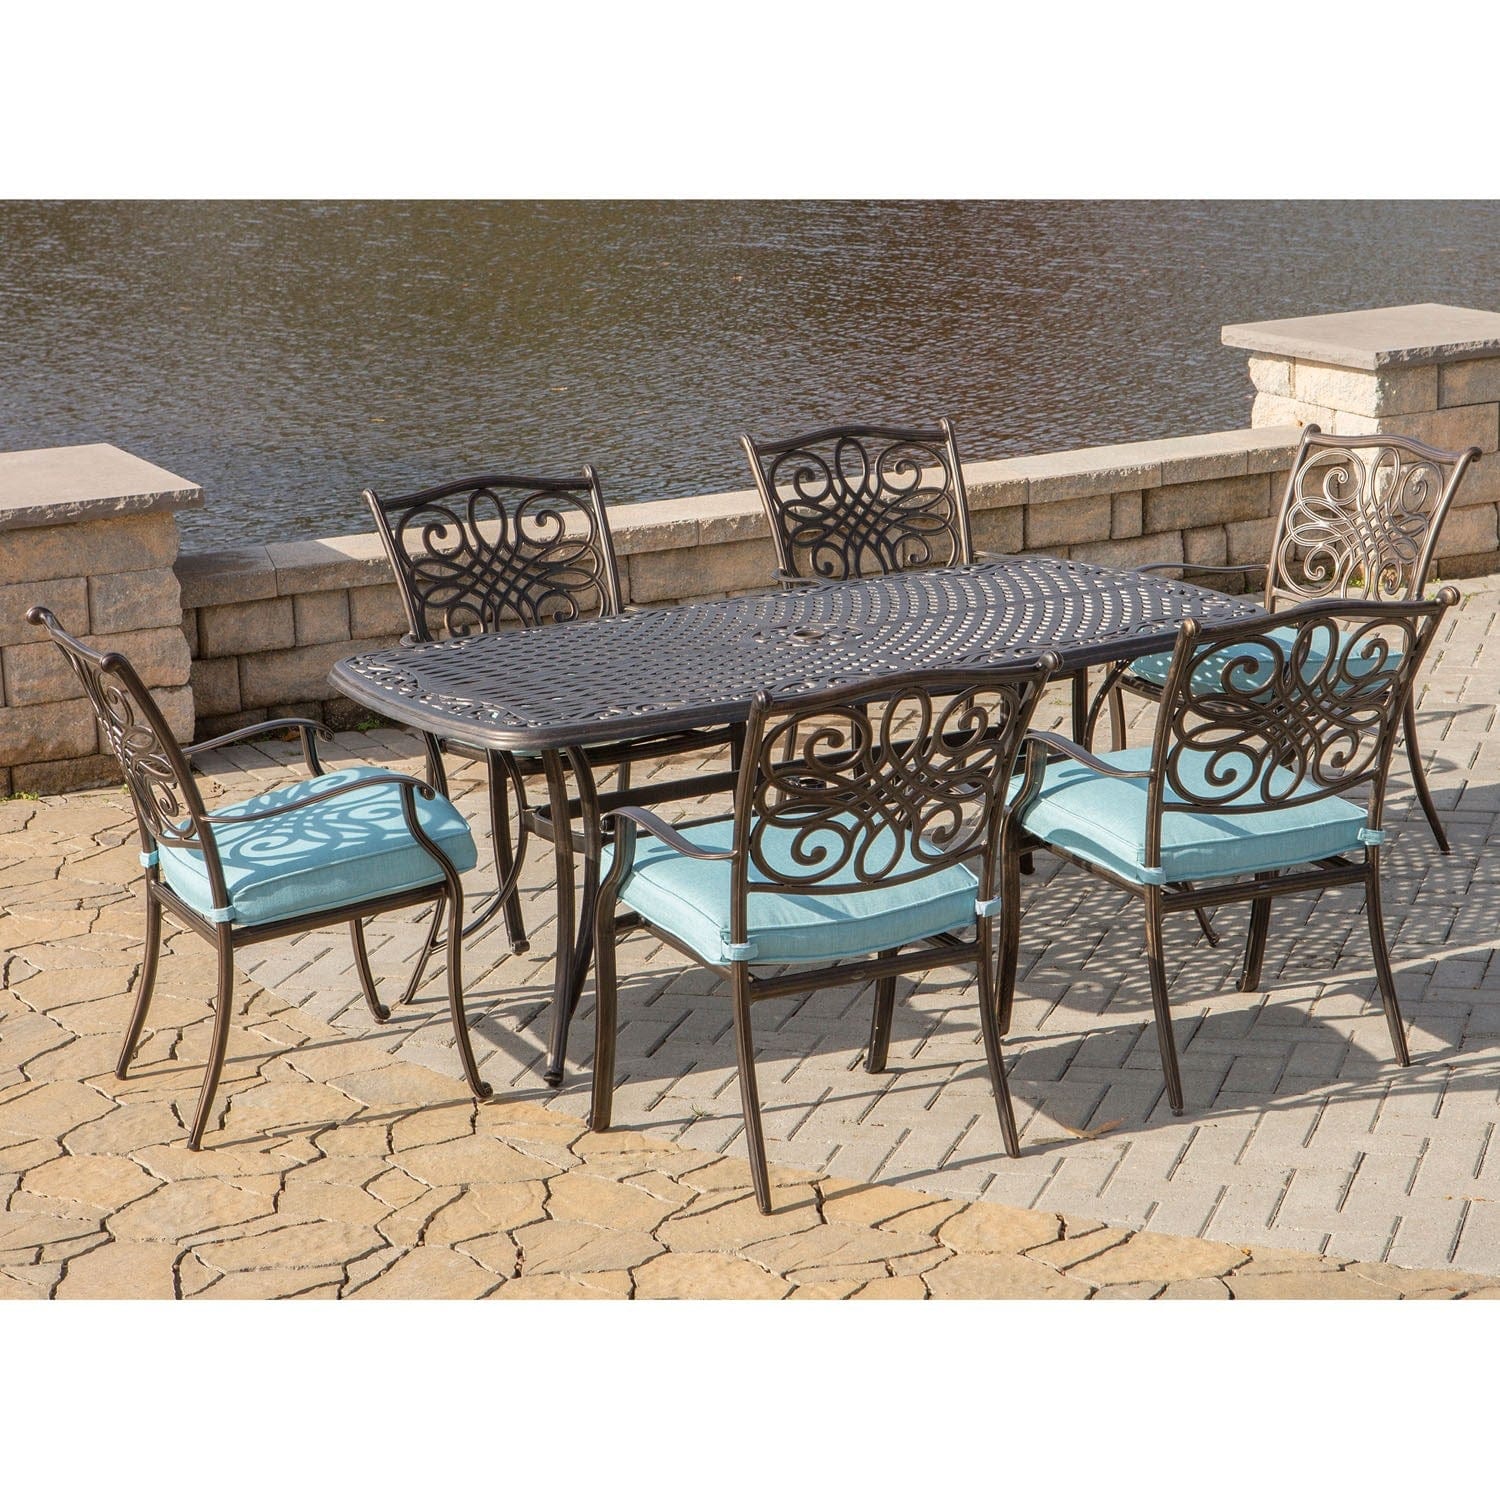 Hanover Outdoor Dining Set Hanover - Traditions 7-Piece Aluminum Frame Outdoor Dining Set in Blue|TRADITIONS7PC-BLU